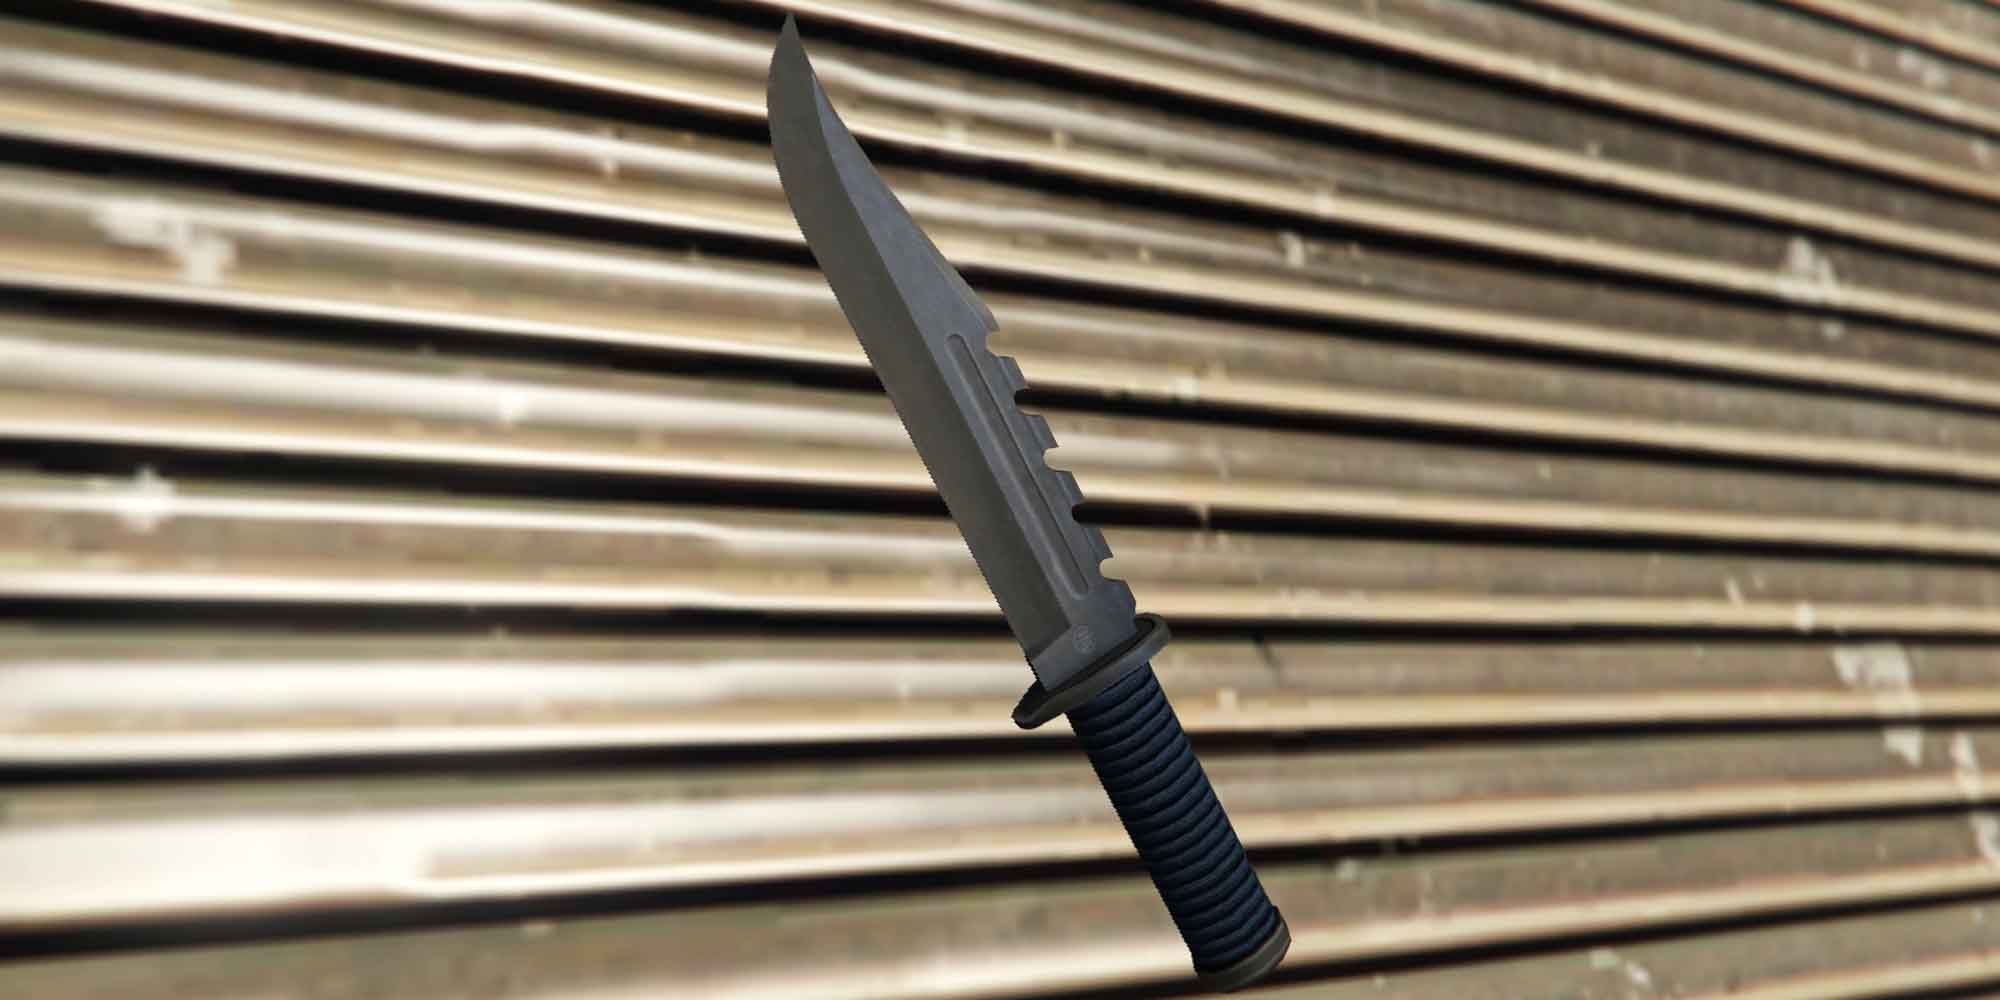 The simple yet effective Knife GTA 5